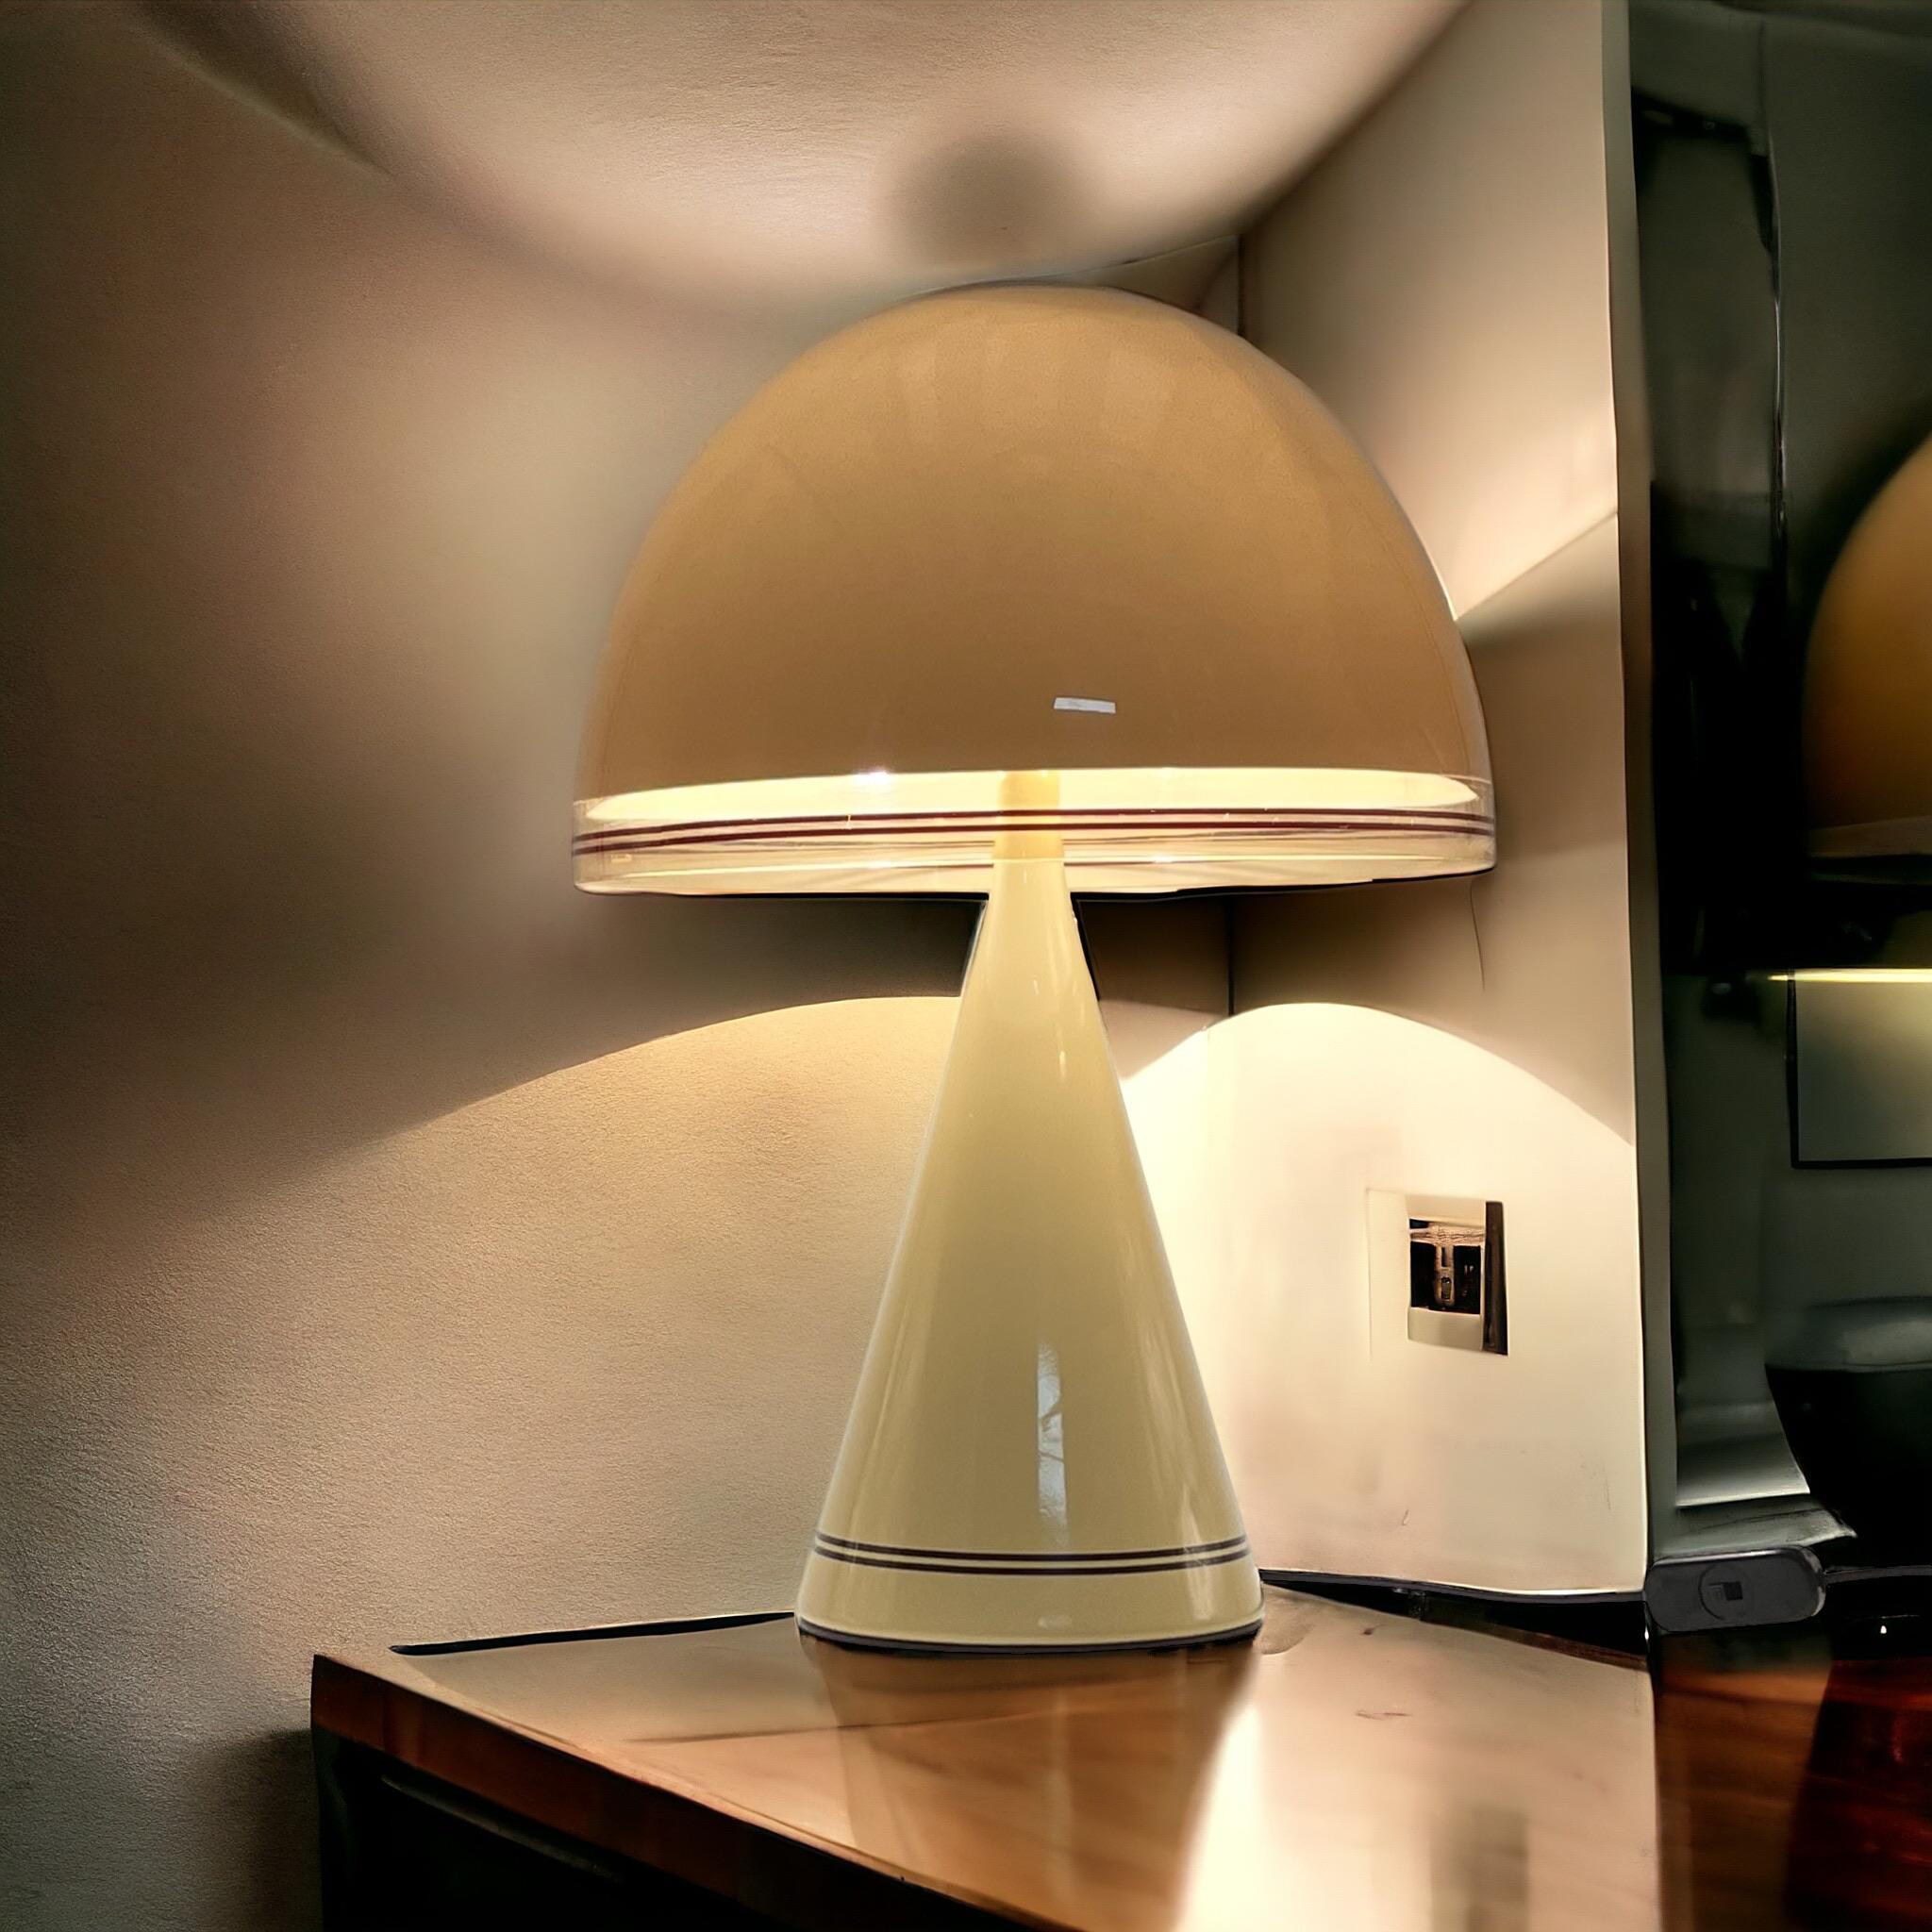 Embrace the vibrant spirit of Space Age design with this iconic Mushroom 70s Lamp ‘Baobab’ by iGuzzini, a stunning creation by the esteemed Italian design team in 1976, produced from 1978 until 1992. The ‘Baobab’ table lamp boasts a striking